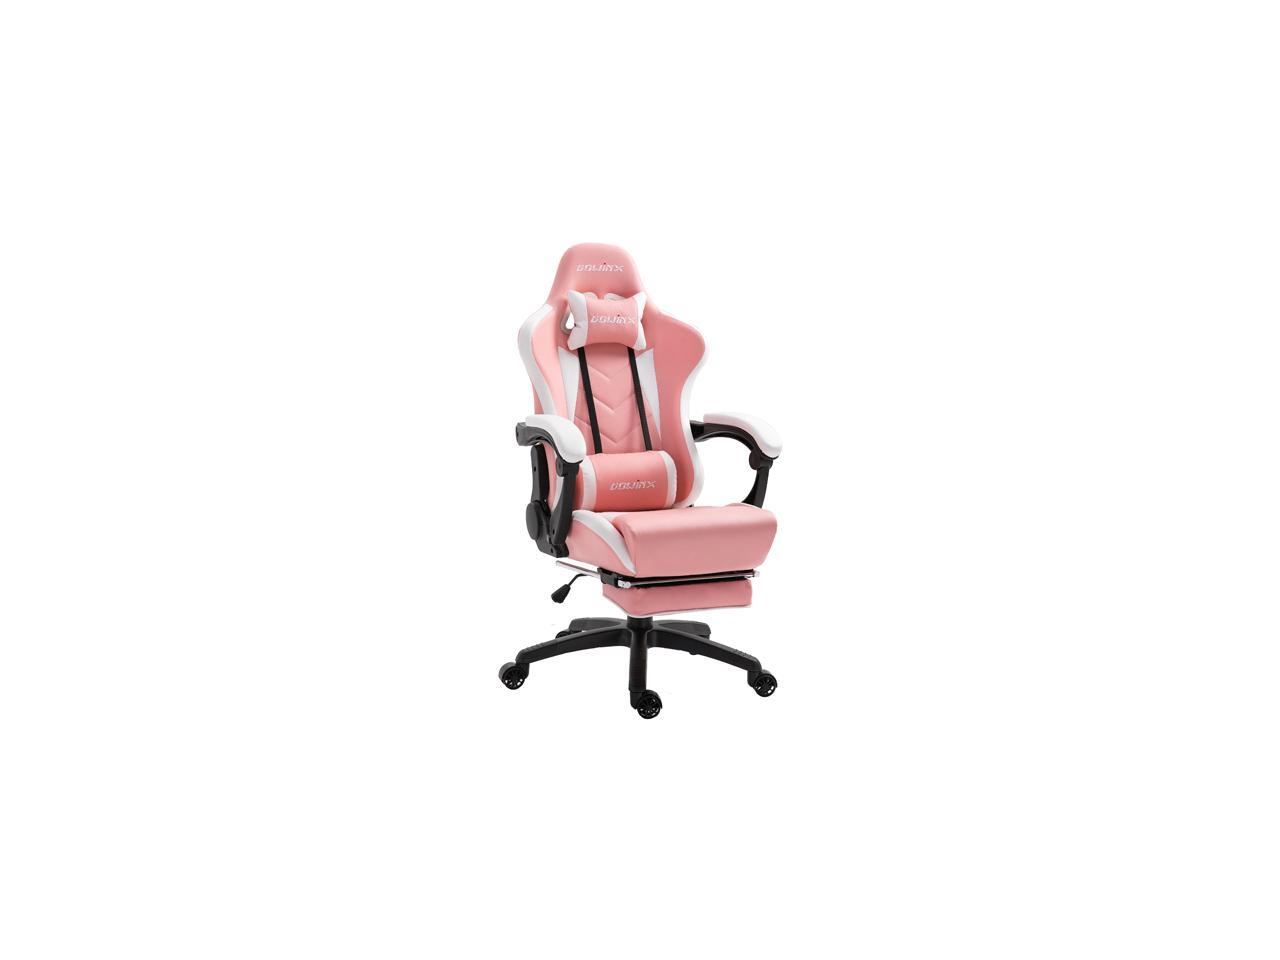 Dowinx Gaming Chair Ergonomic Racing Style Recliner, Pink